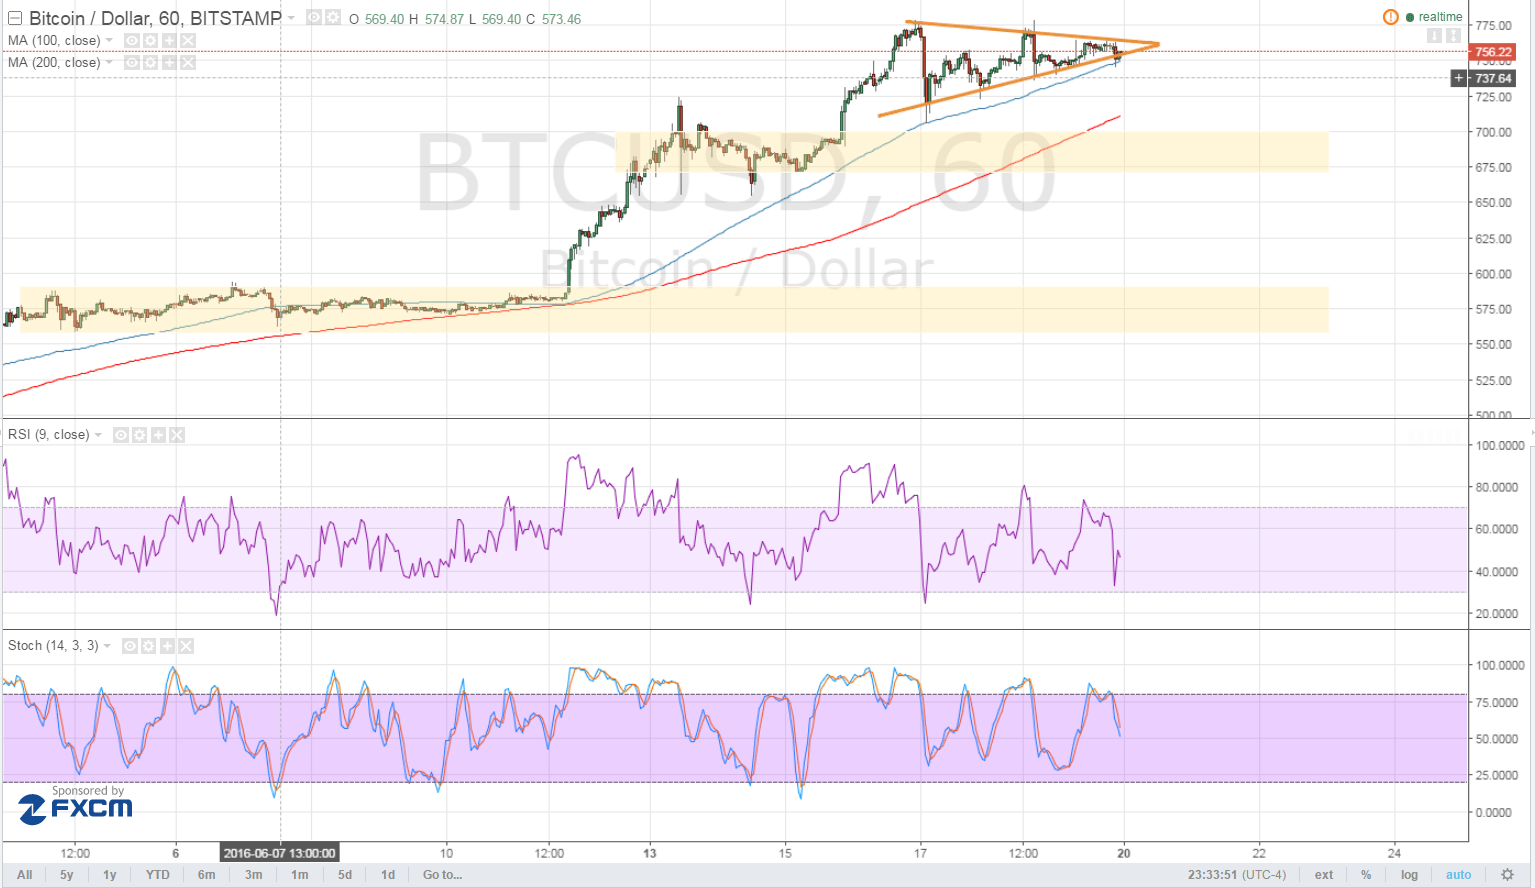 Bitcoin Price Technical Analysis for 06/20/2016 - Potential Selloff Levels